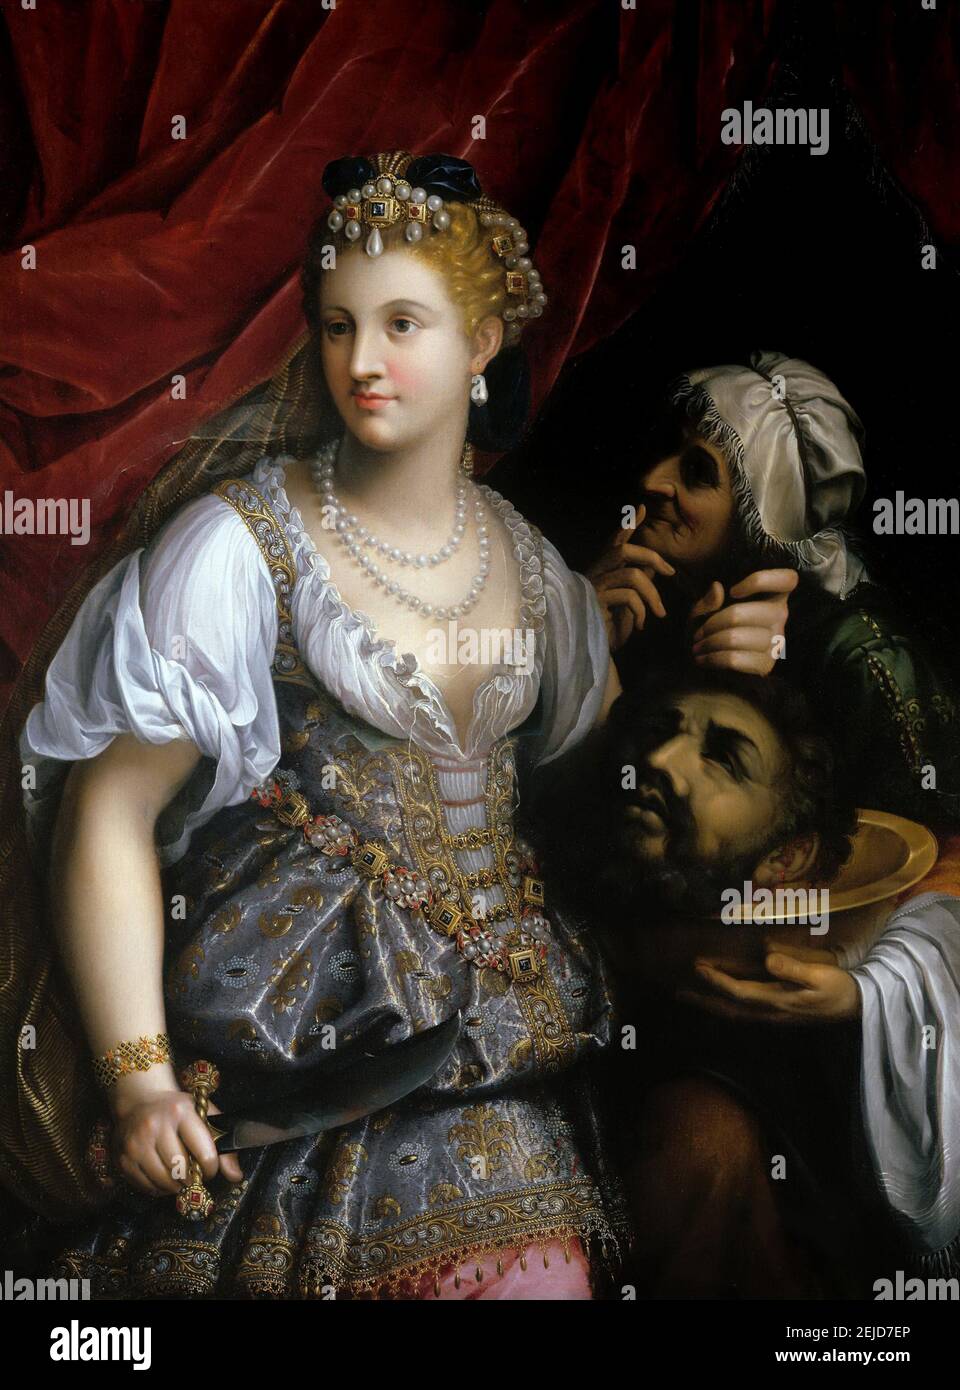 Judith with the Head of Holofernes. Museum: Galleria Borghese, Rome. Author: FEDE GALIZIA. Stock Photo